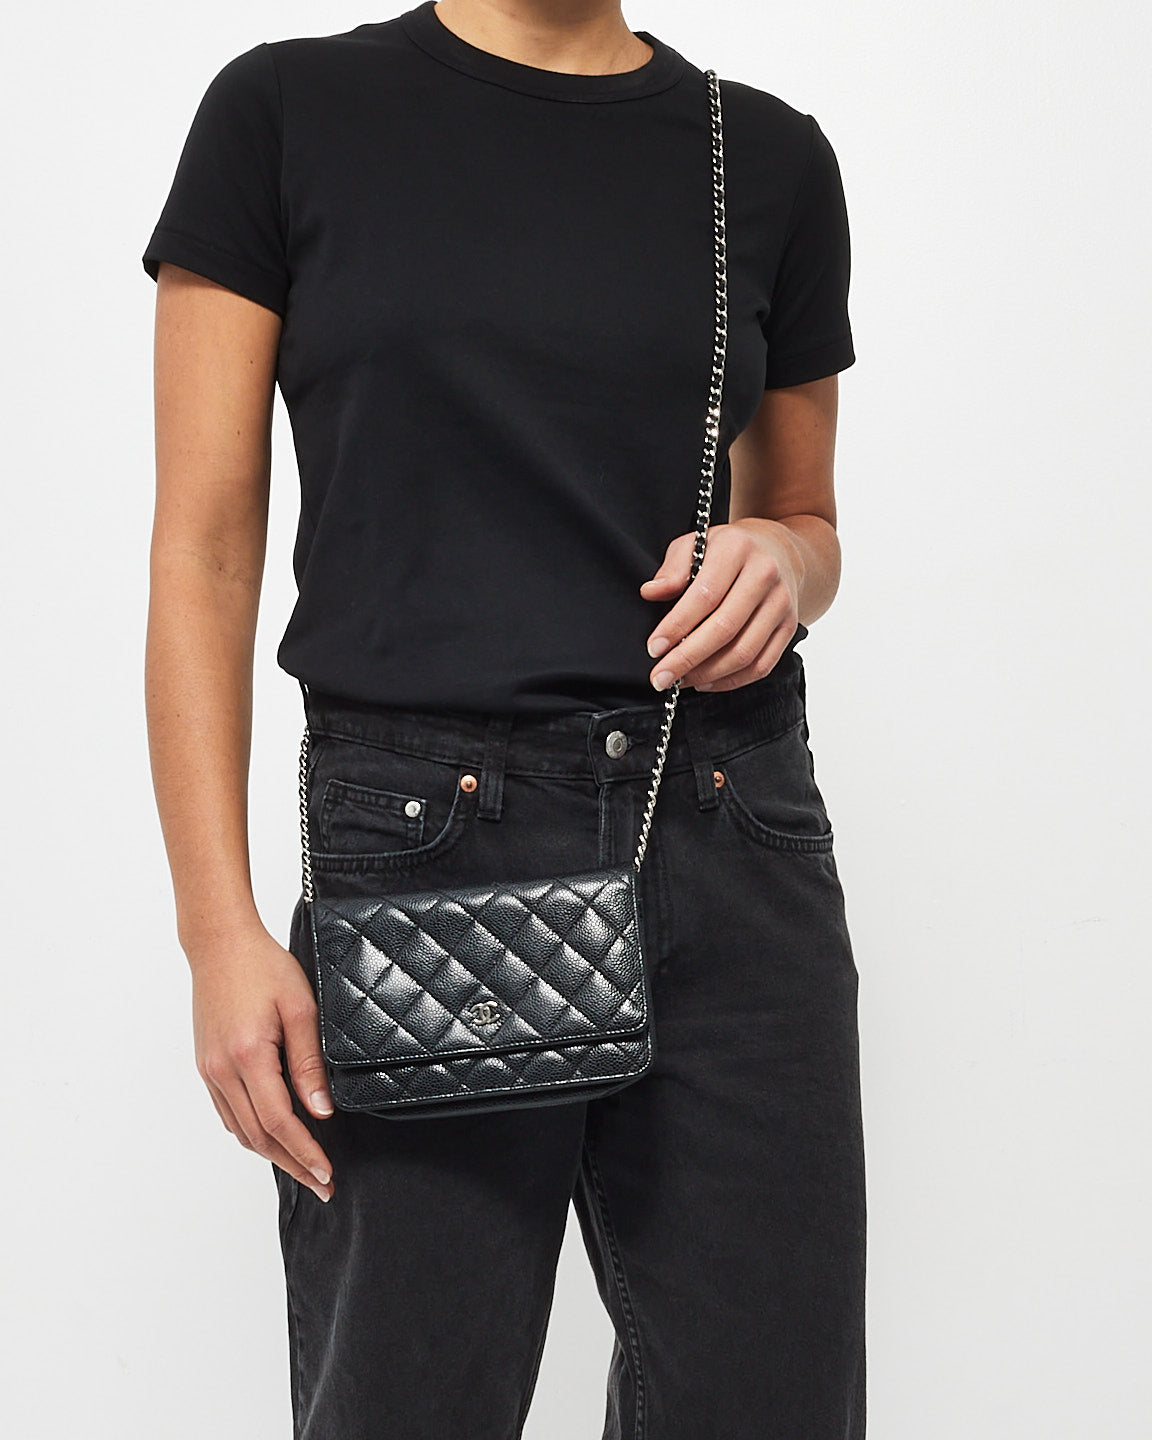 Chanel Black Caviar Leather Quilted Wallet On Chain SHW